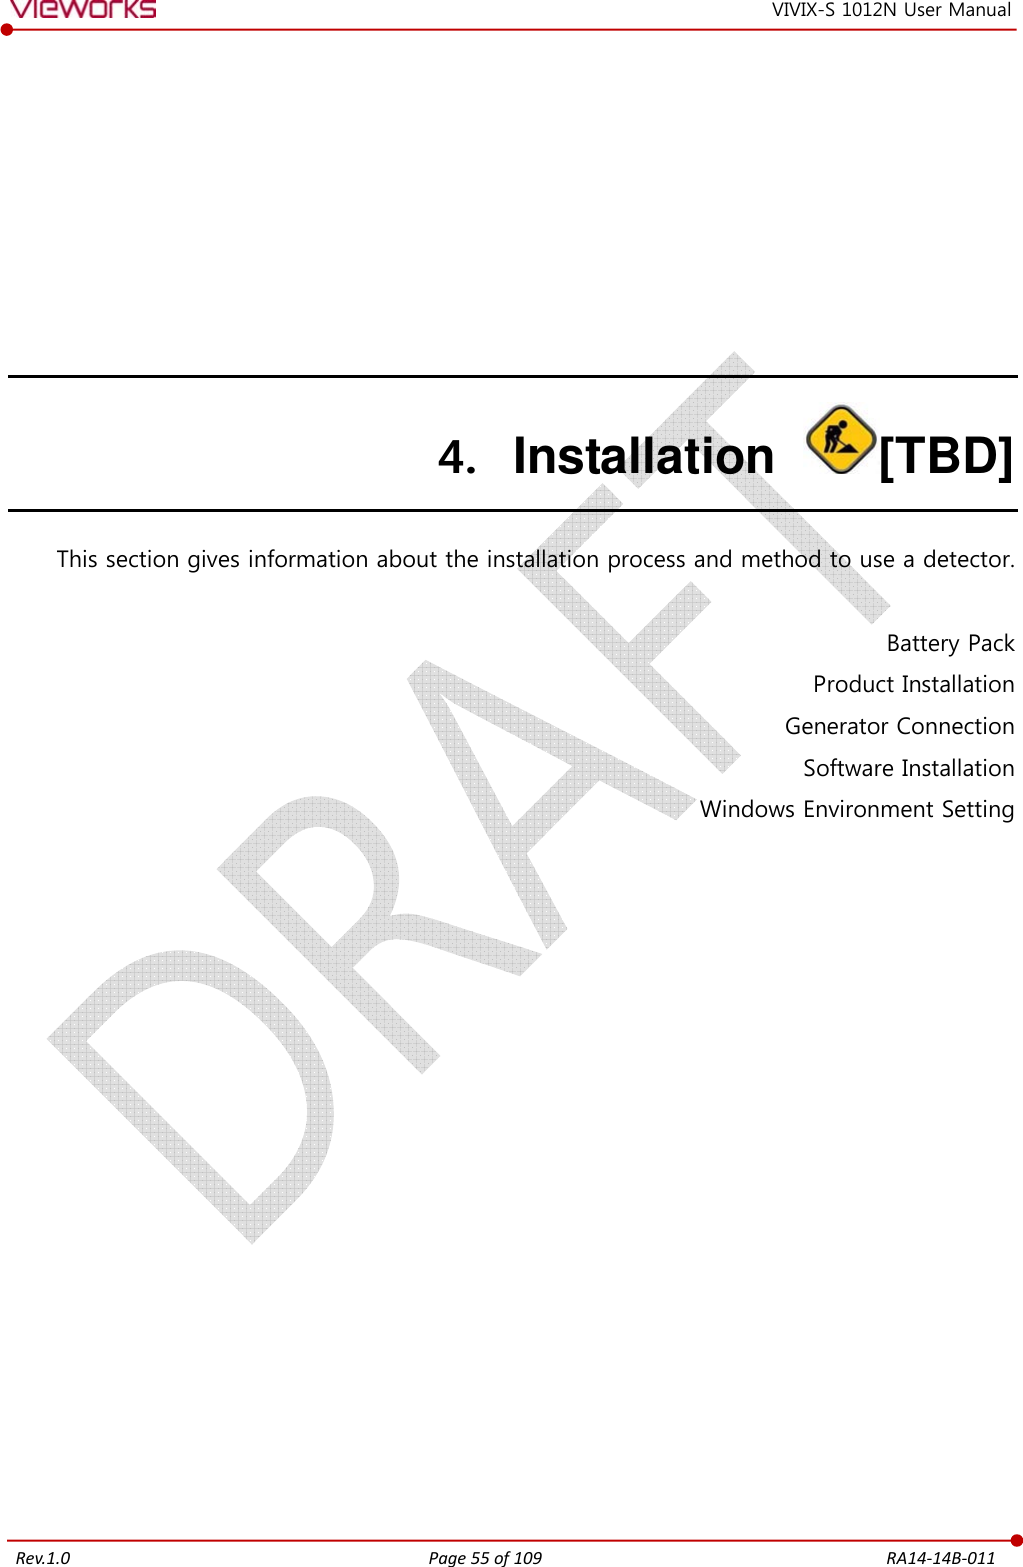   Rev.1.0 Page 55 of 109  RA14-14B-011 VIVIX-S 1012N User Manual 4. Installation  [TBD] This section gives information about the installation process and method to use a detector.  Battery Pack Product Installation Generator Connection Software Installation Windows Environment Setting         